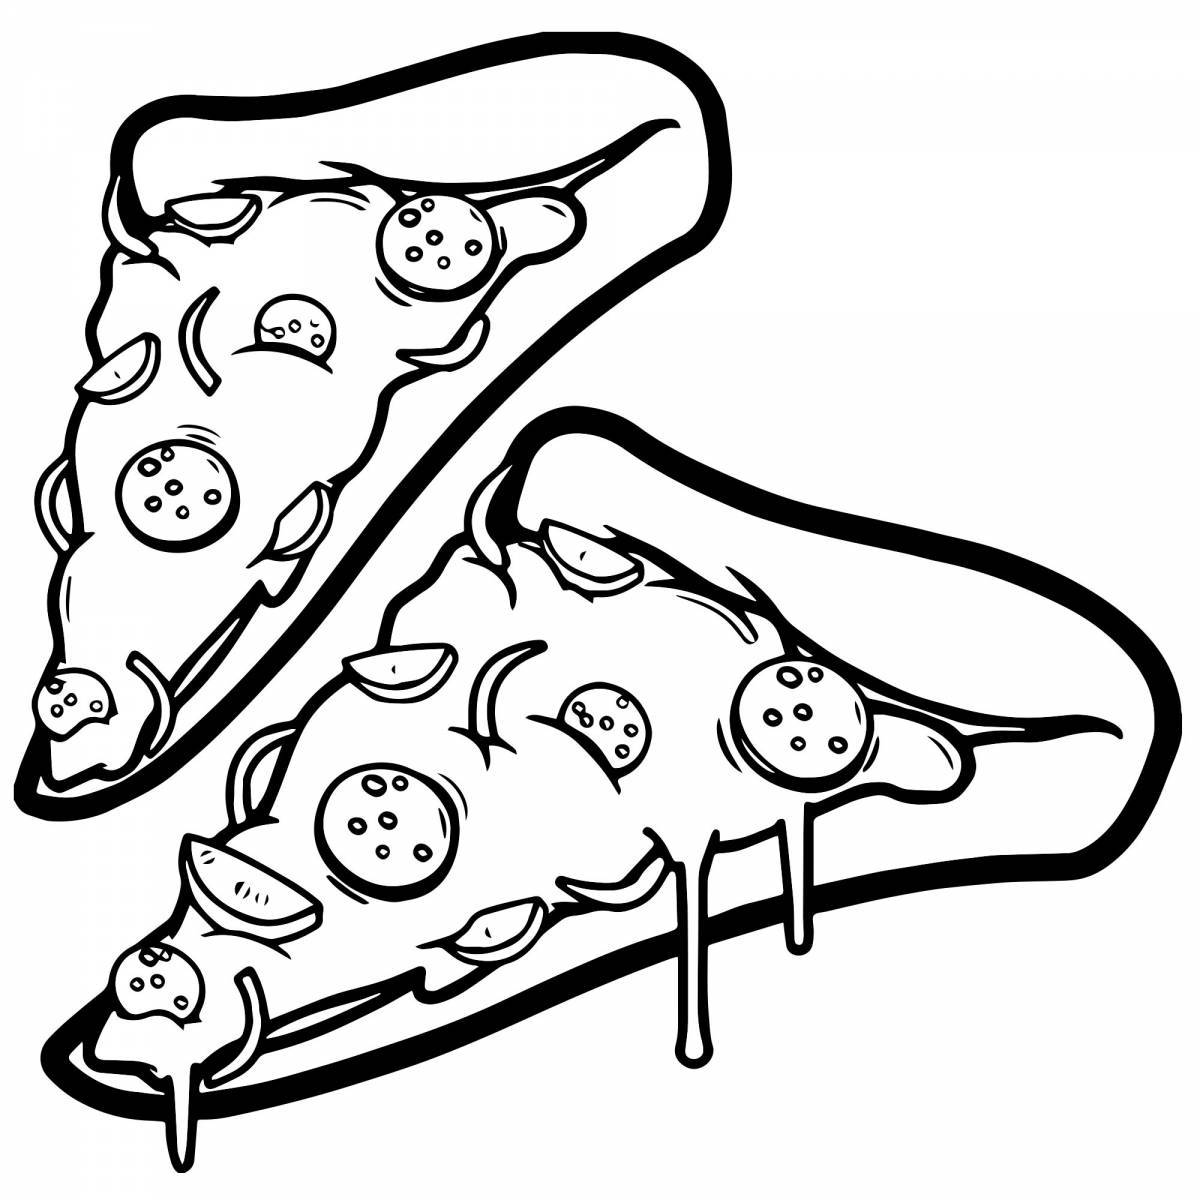 Pizza for kids #1